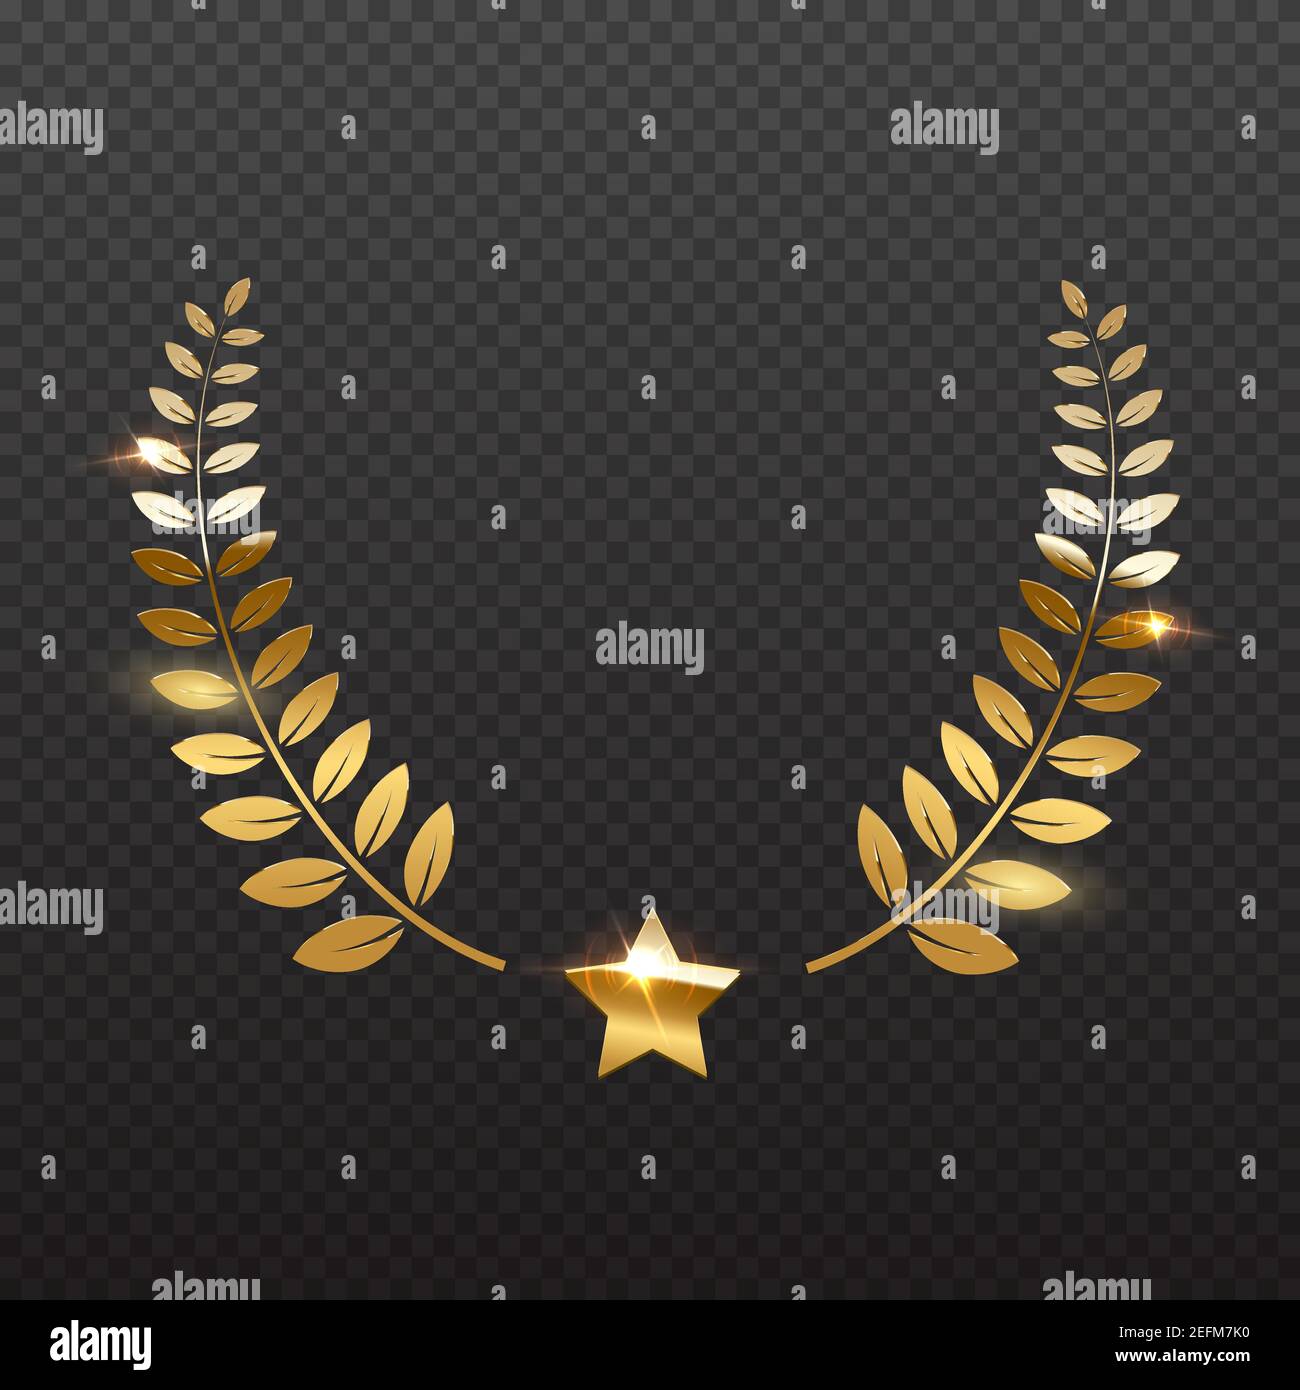 Award star and golden laurel. Gold prize elements on transparent background. Champion glory in competition vector illustration. Hollywood fame in film Stock Vector